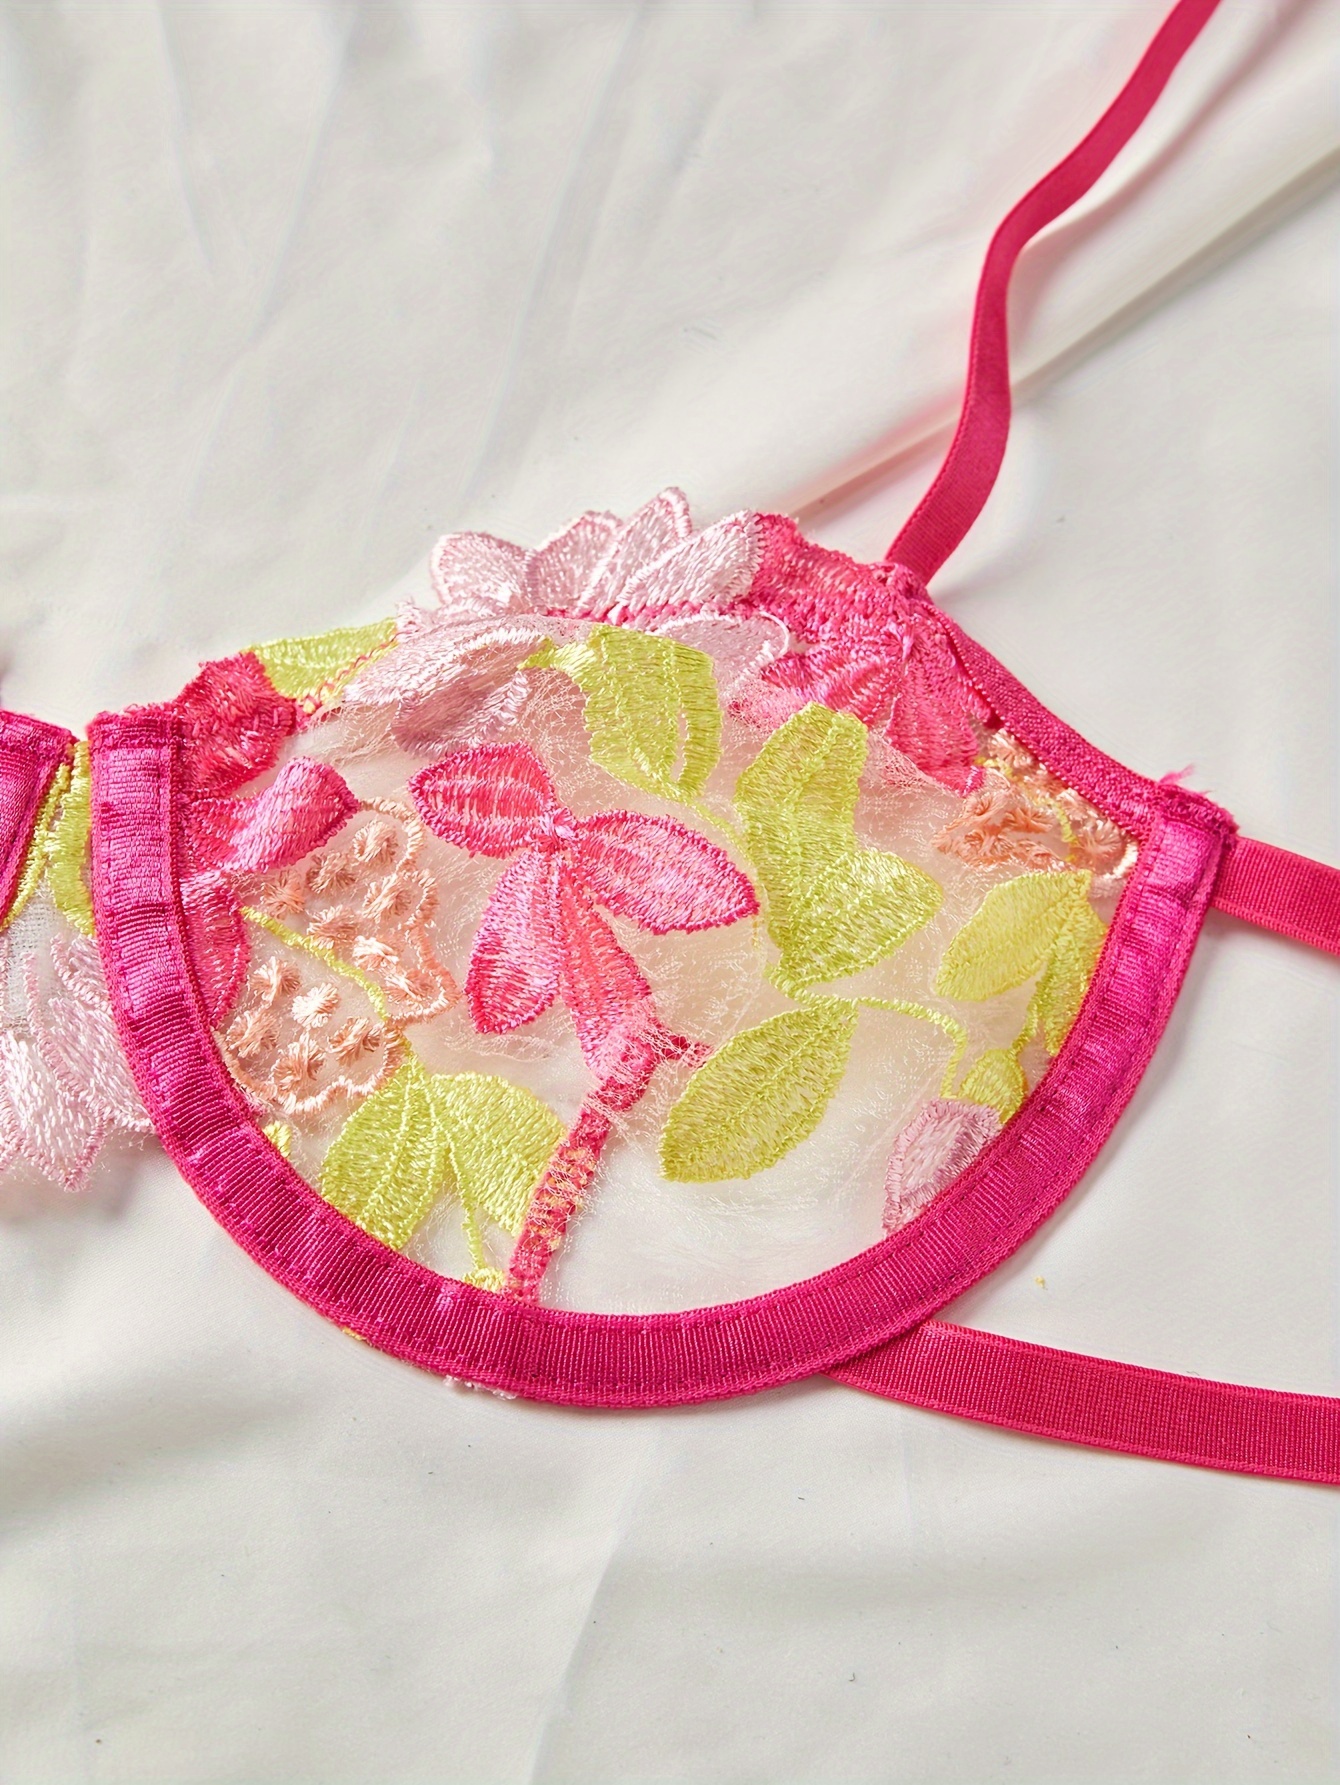 Cut-out Embroidery Lace Lingerie Set, Shop Today. Get it Tomorrow!